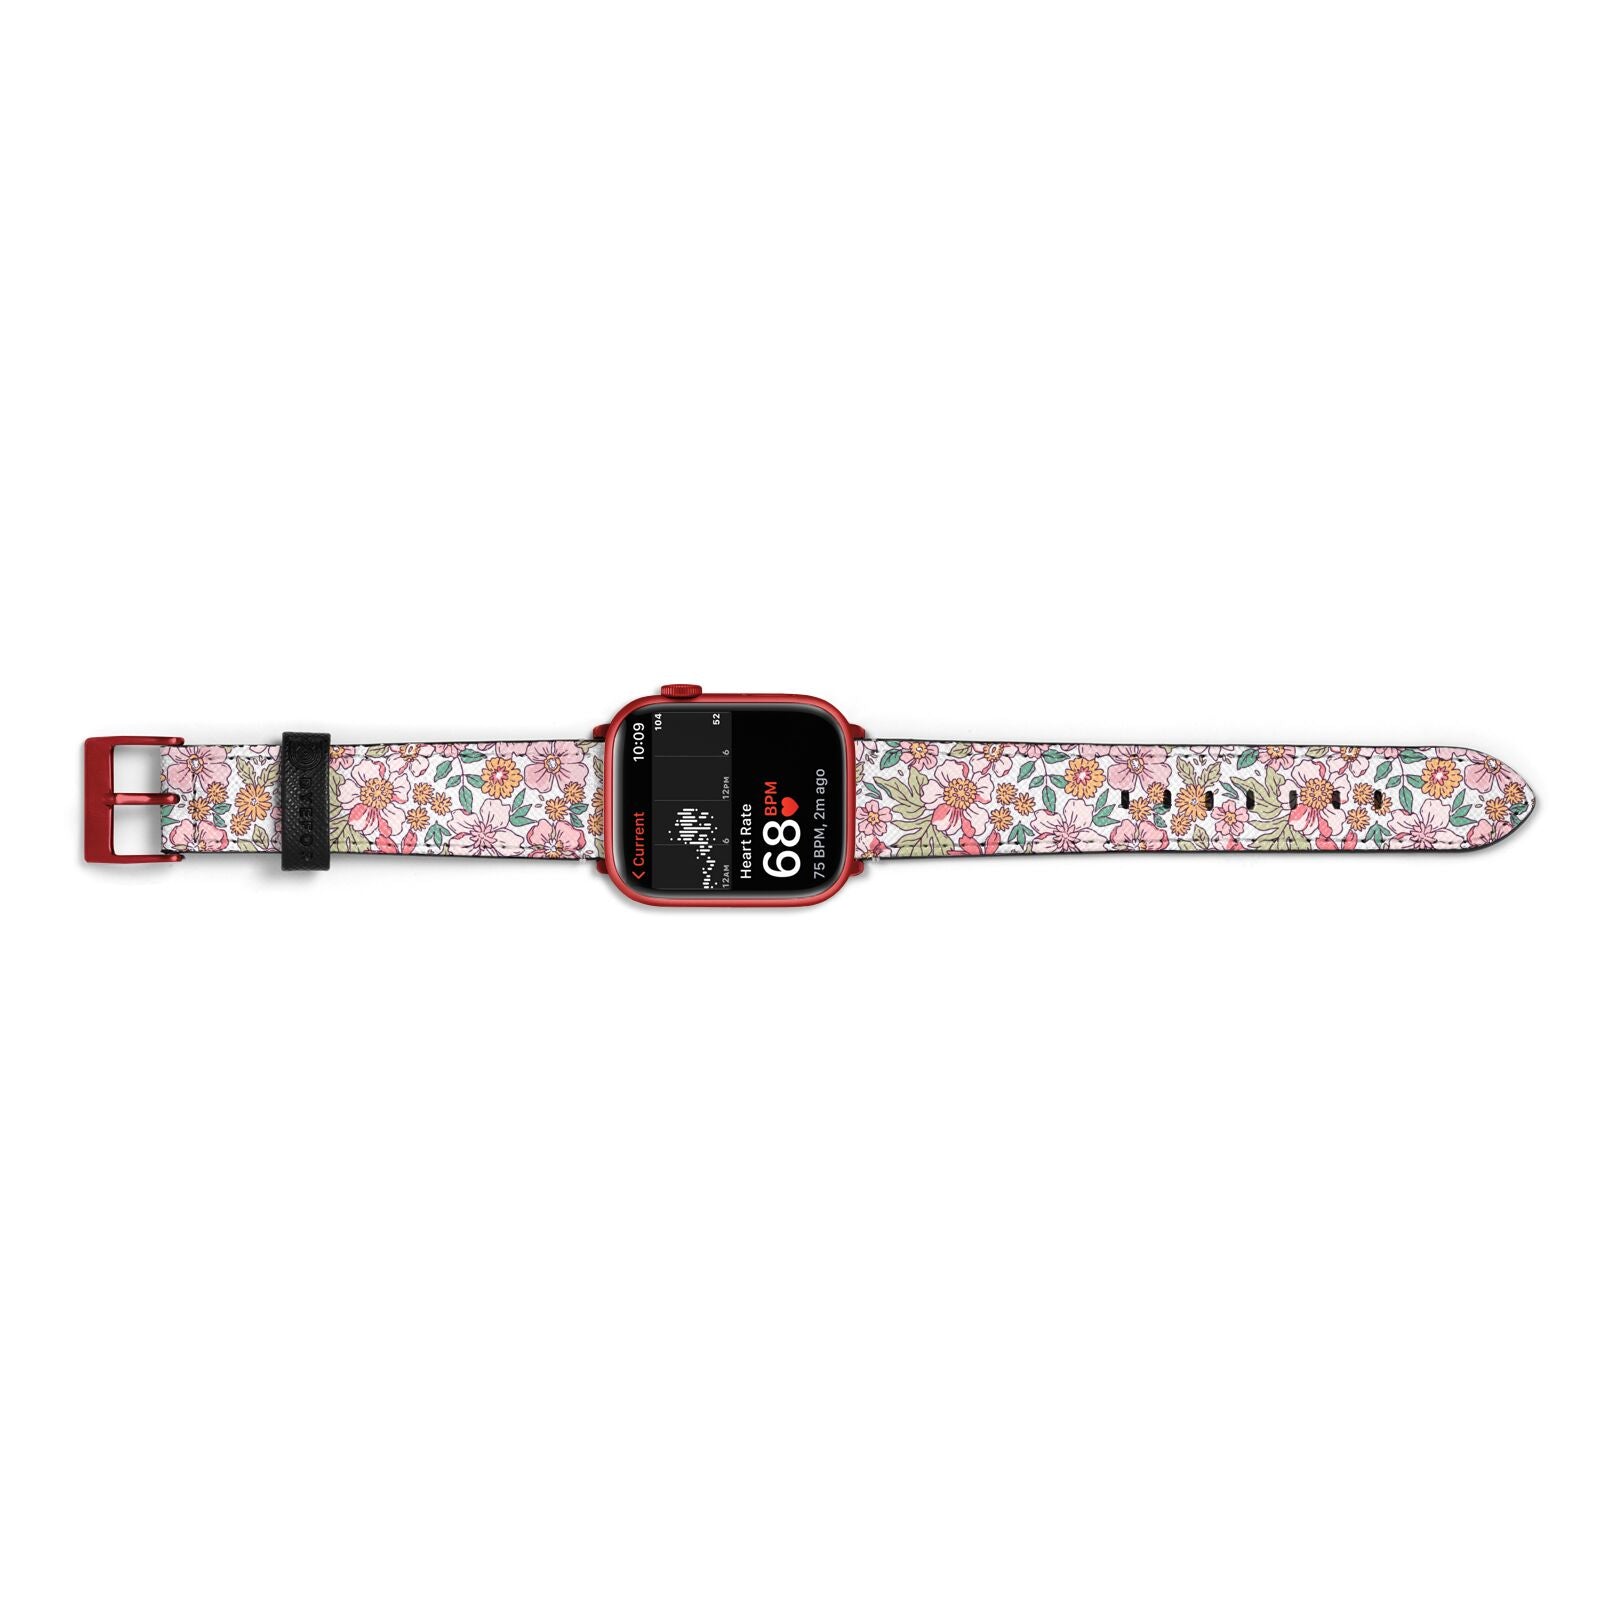 Small Floral Pattern Apple Watch Strap Size 38mm Landscape Image Red Hardware